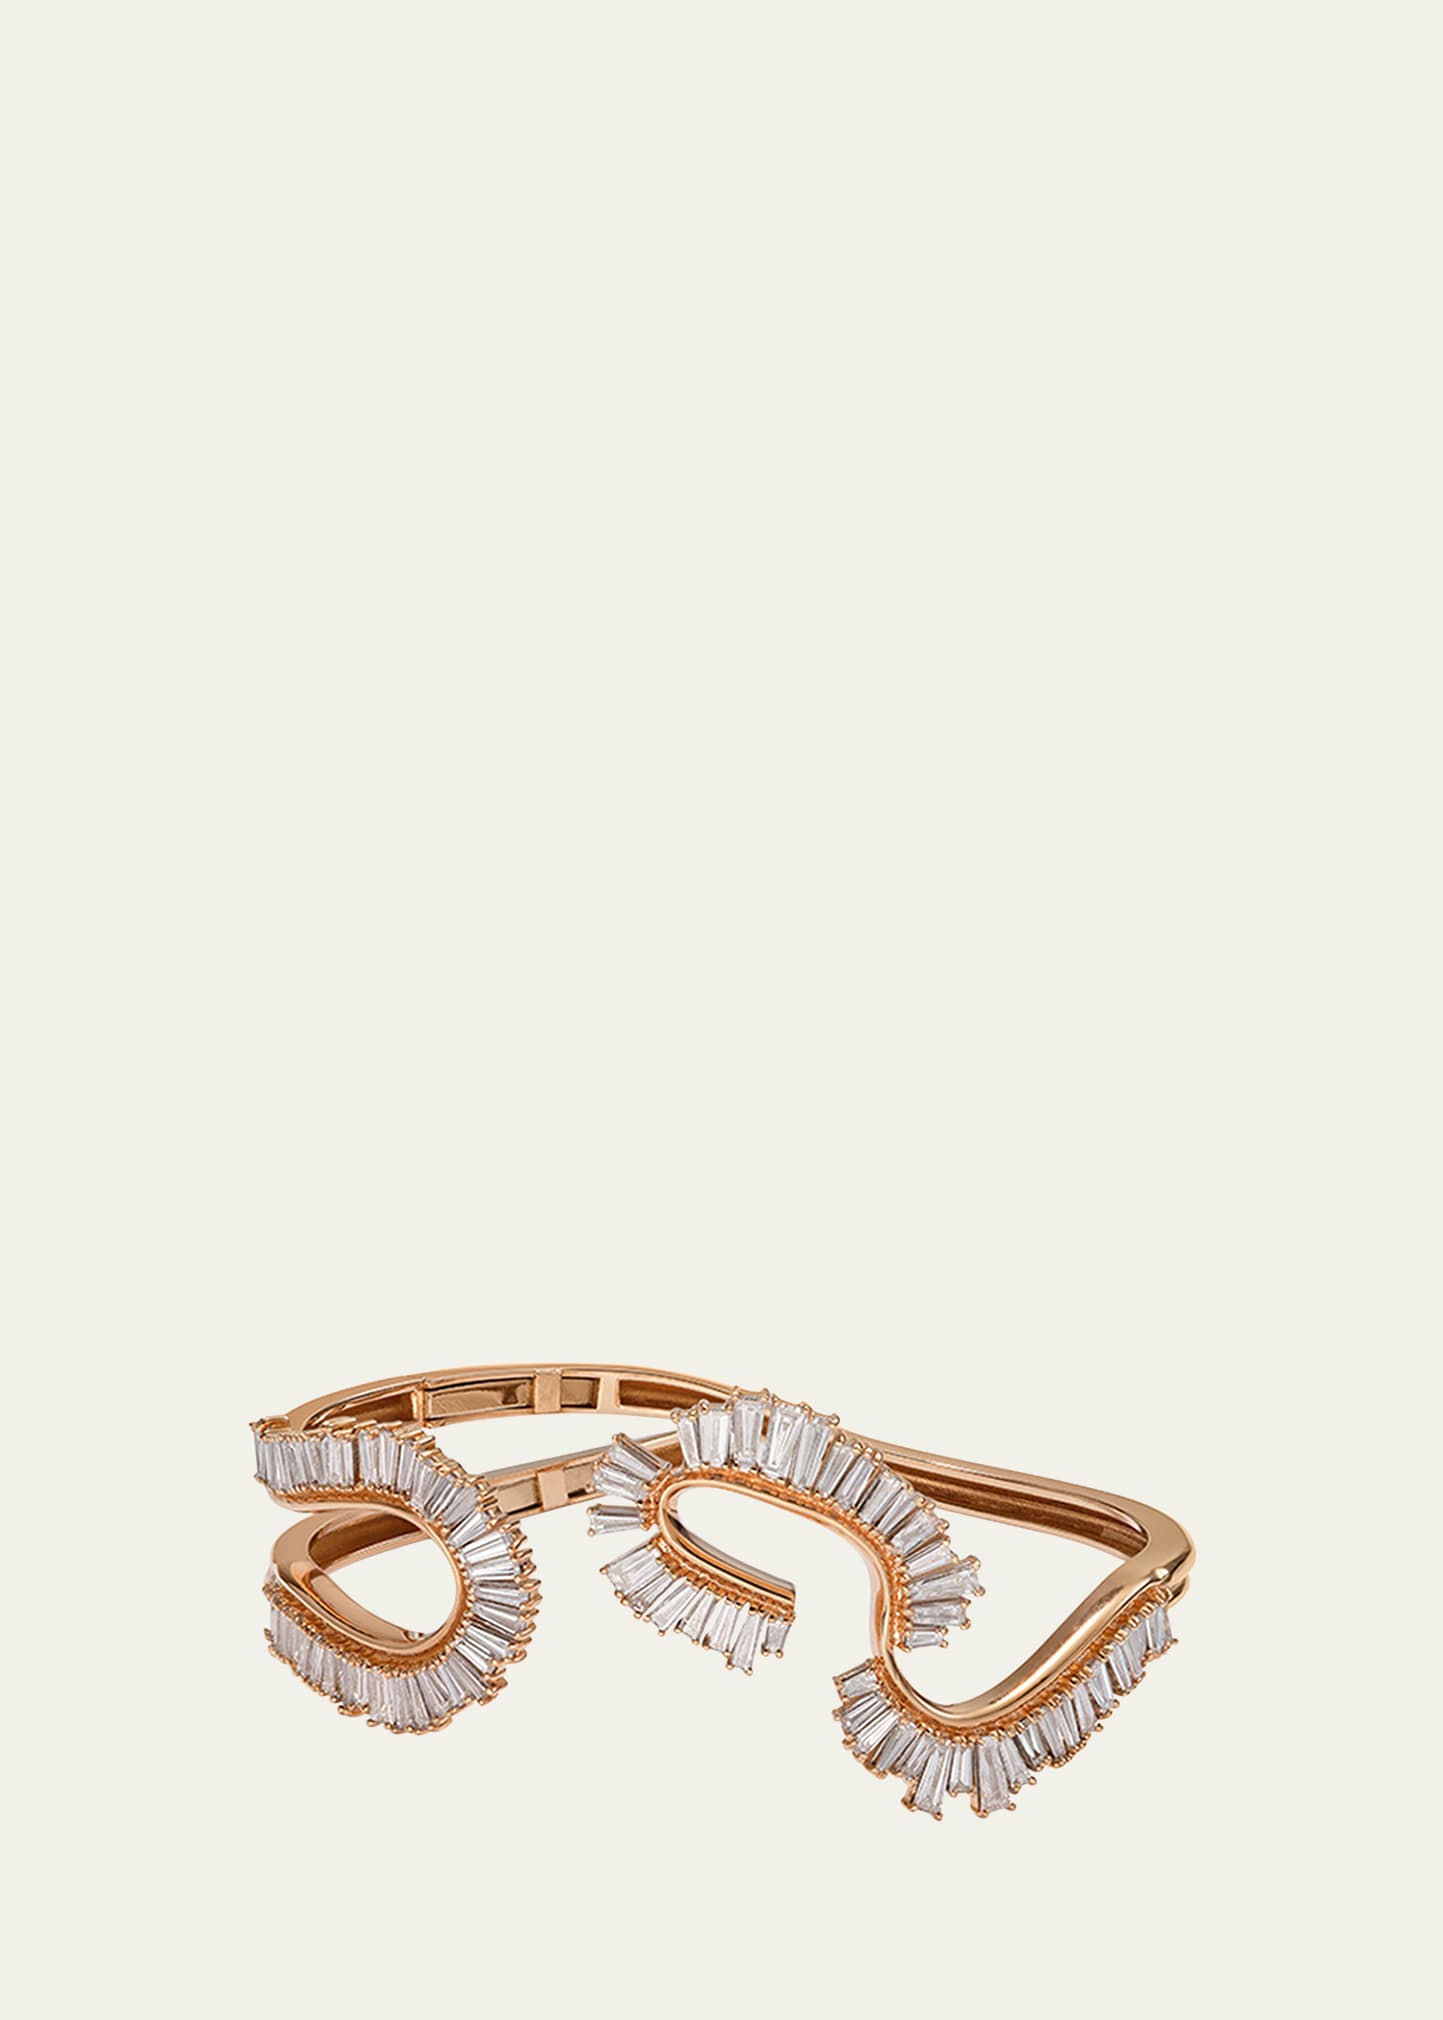 20K Rose Gold Loop and Fringe Cuff Bracelet with Diamonds